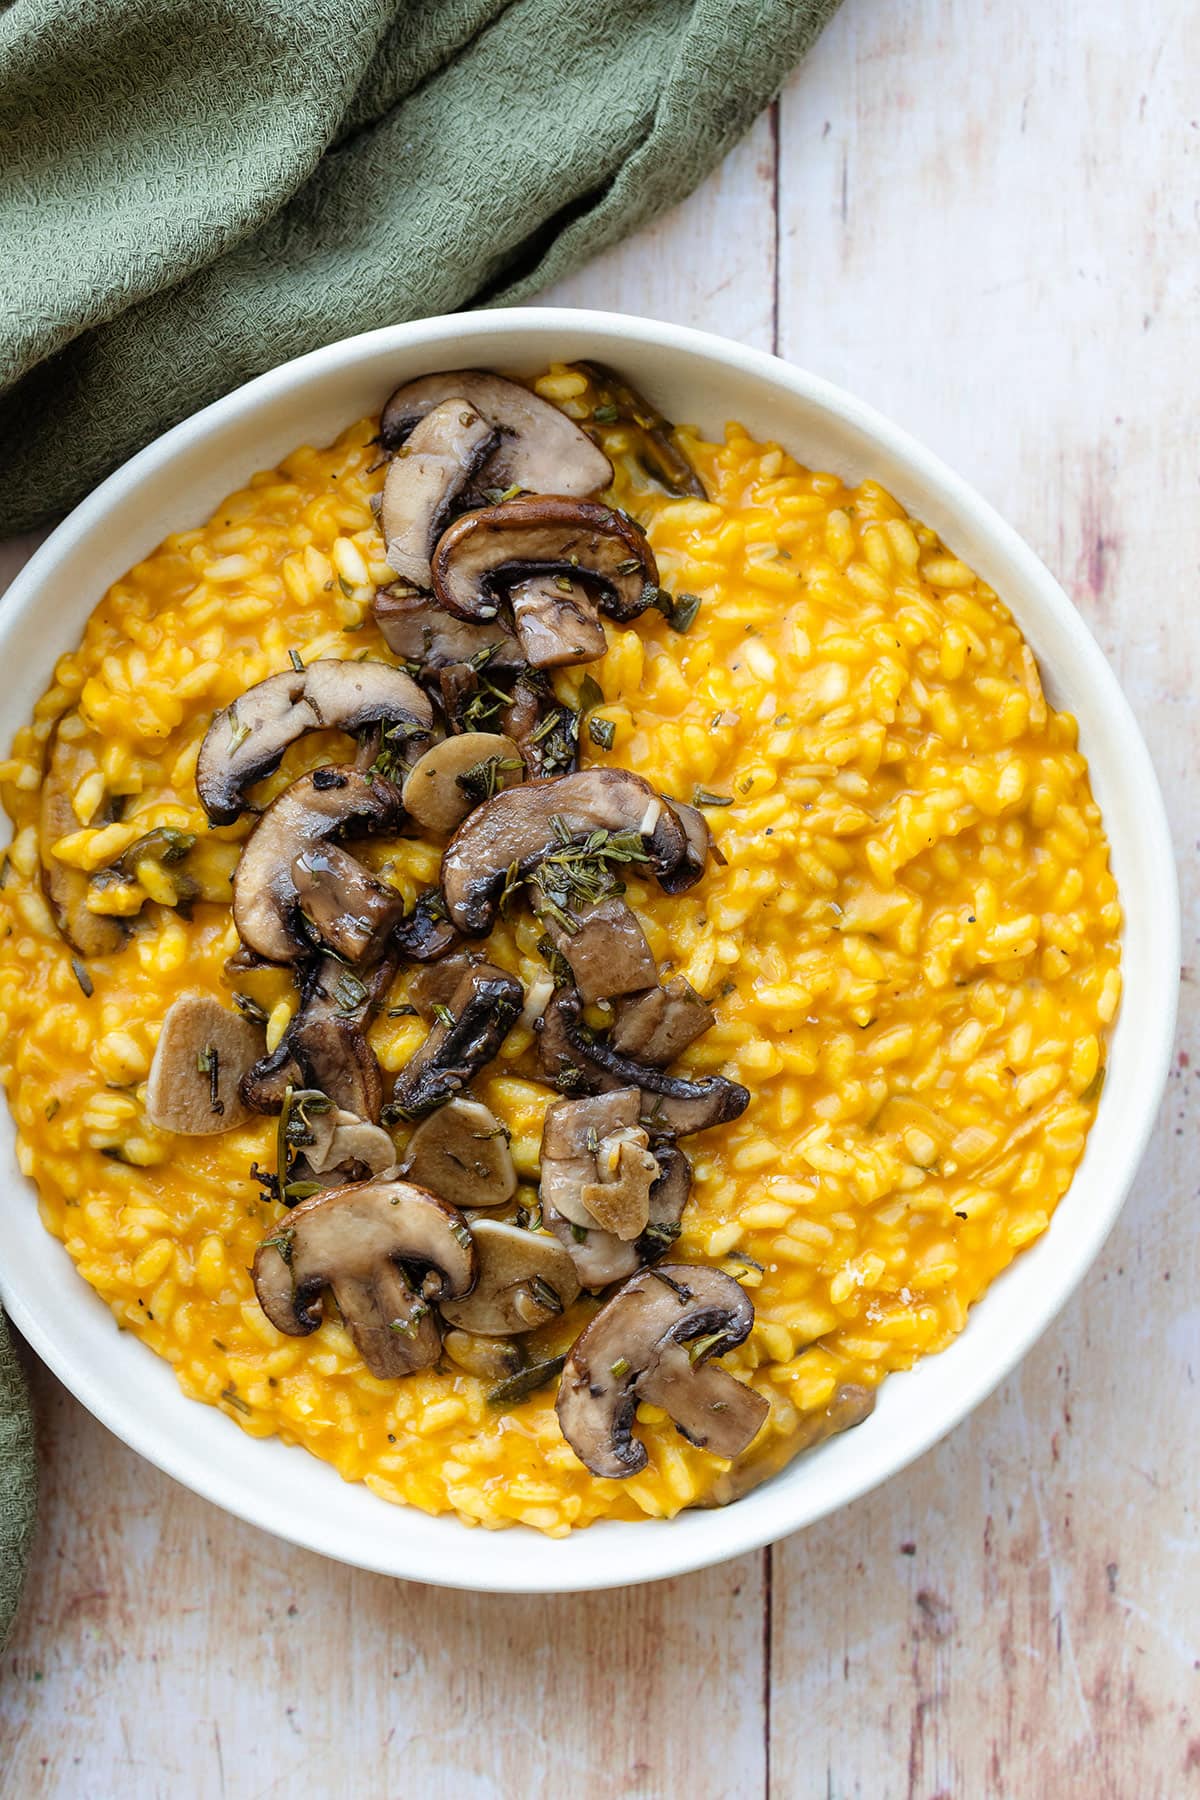 Pumpkin risotto topped with sauteed mushroom in a white plate on a light wooden background.